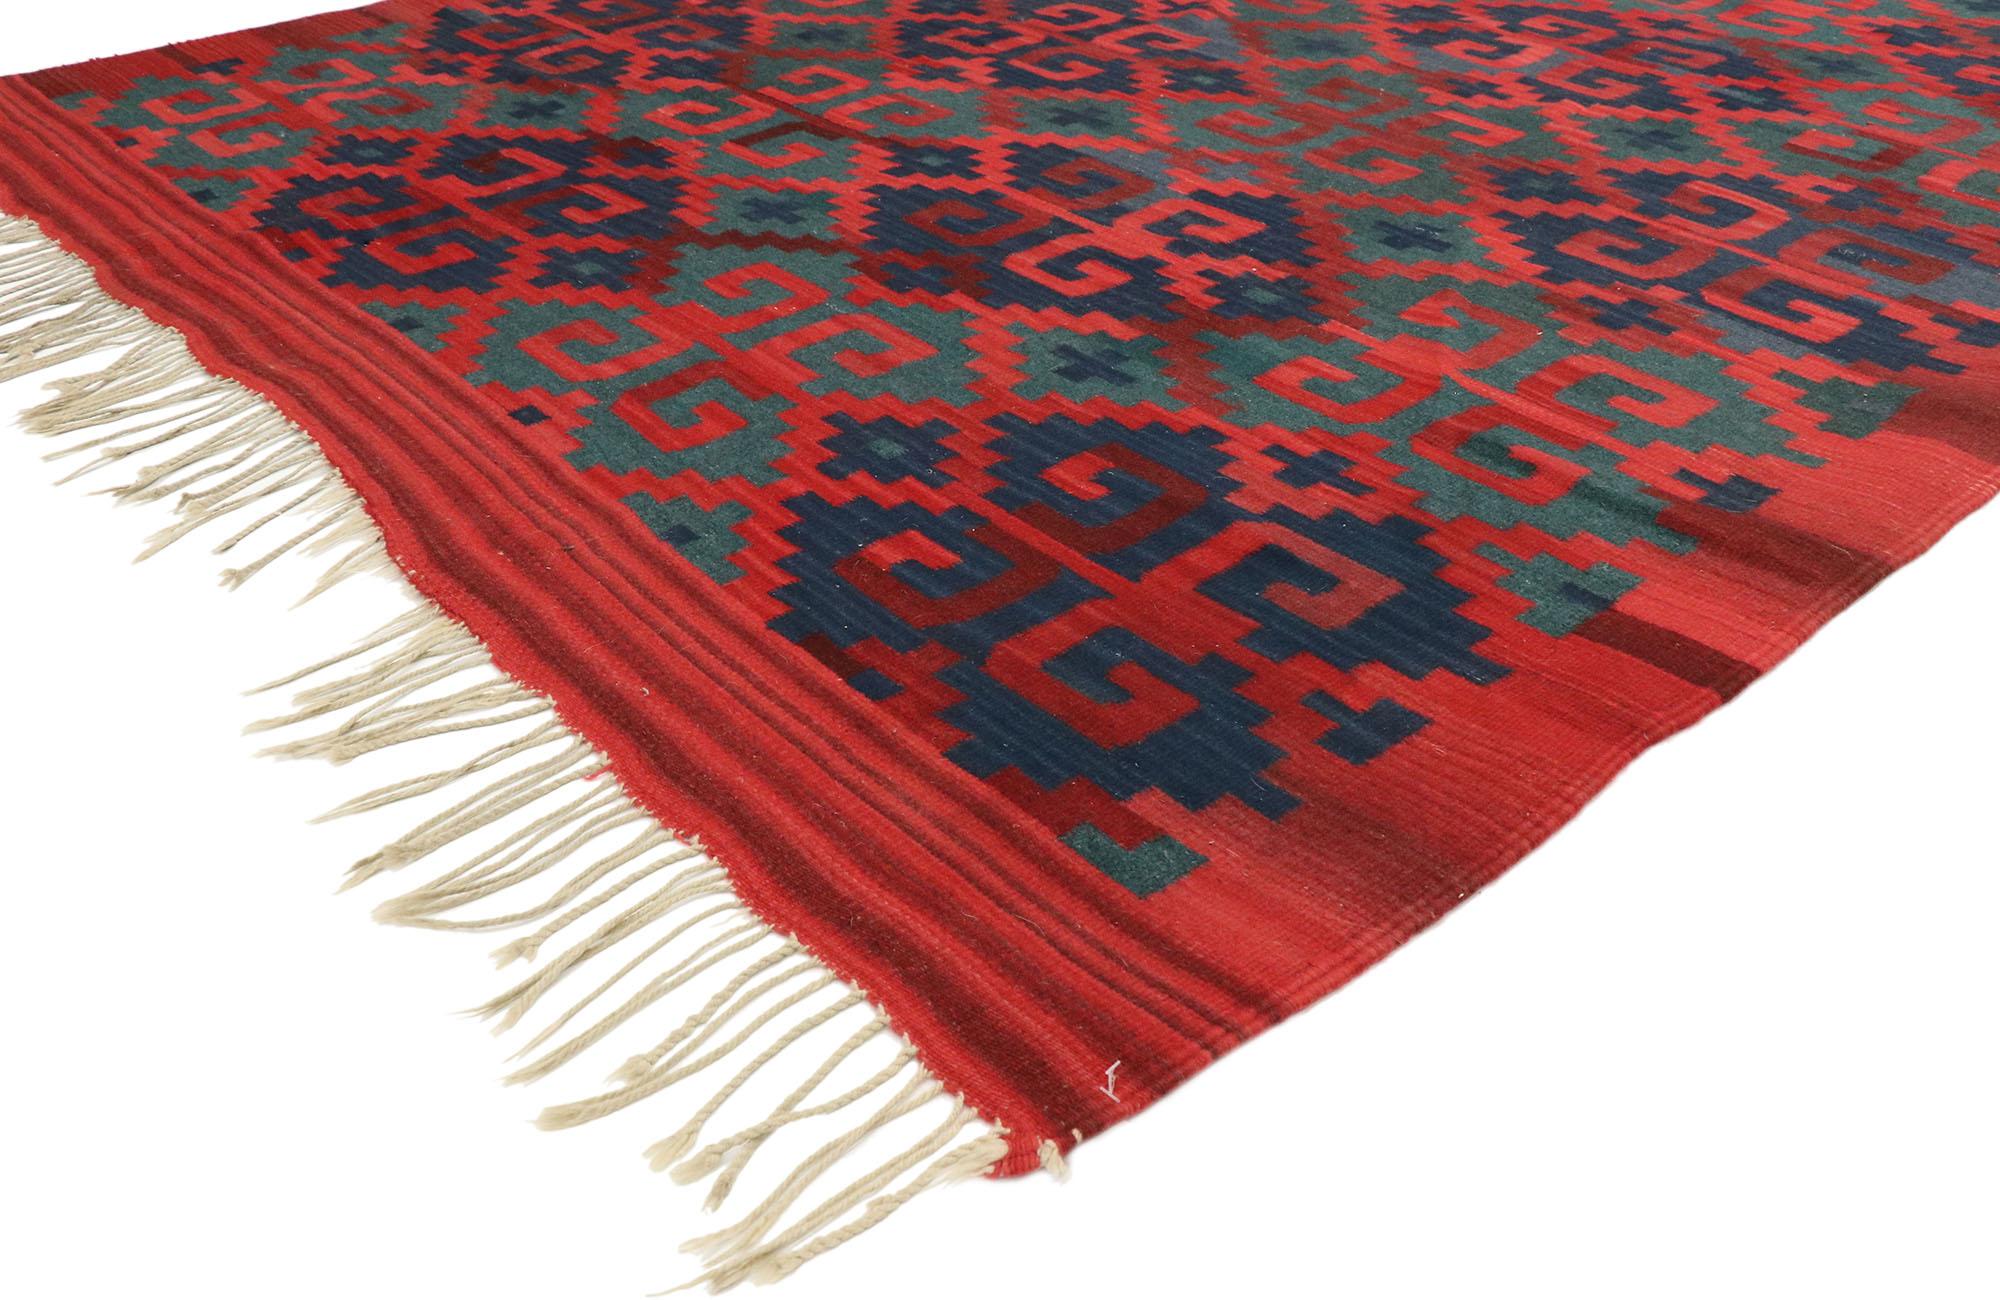 74962, Vintage Persian Kilim Rug with Modern Northwestern Tribal Style. Down-to-earth vibes and rustic sensibility meet Modern Northwestern Tribal style in this handwoven wool vintage Persian Kilim rug. The abrashed red field features an all-over